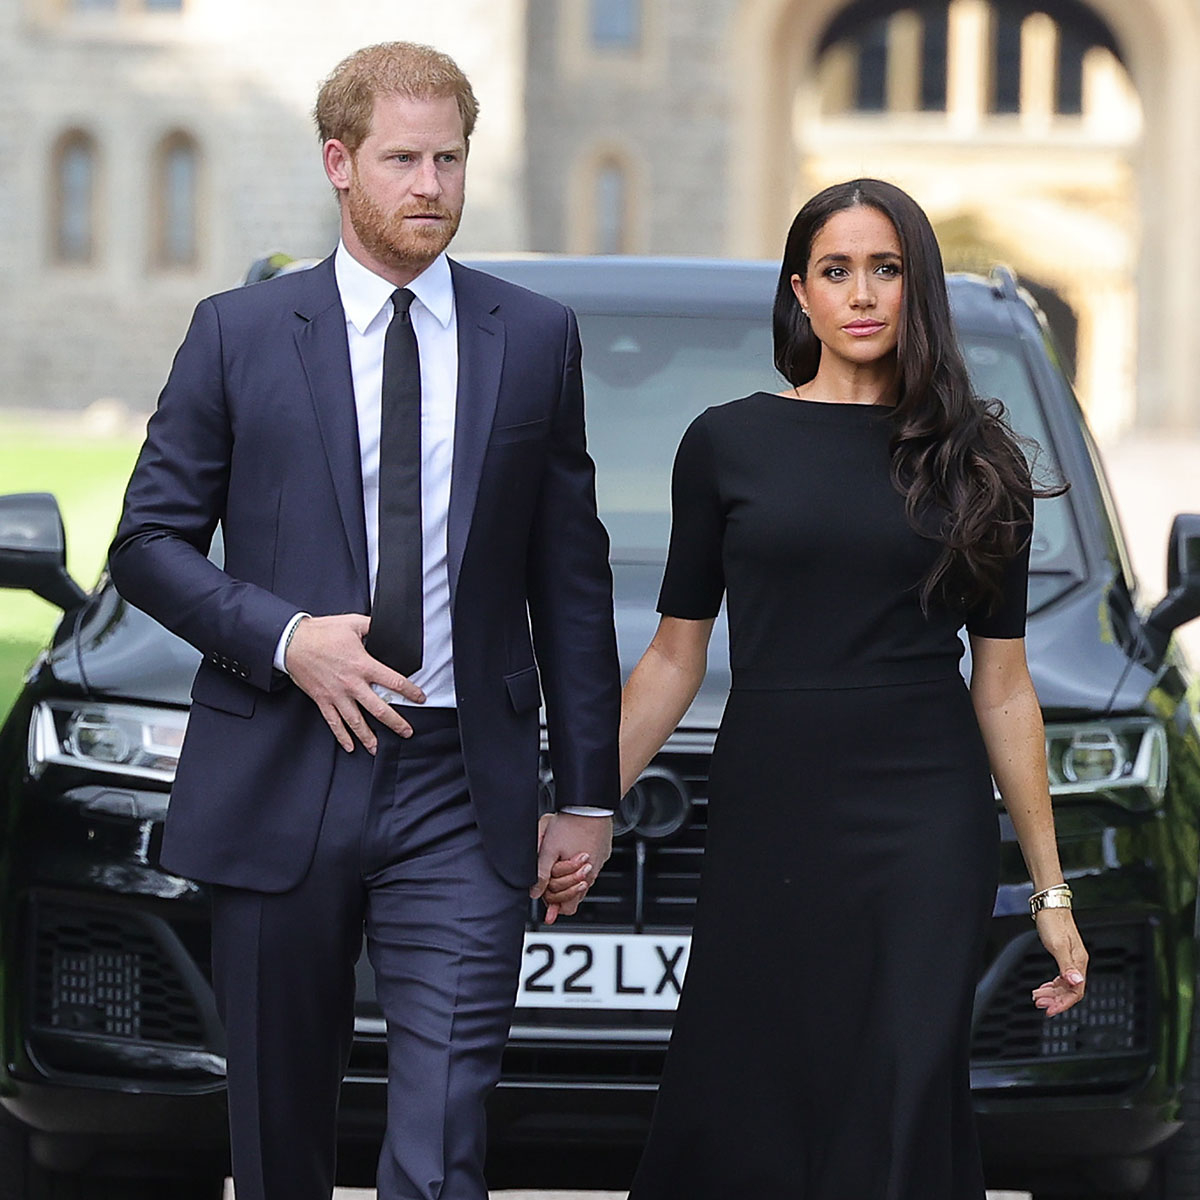 Prince Harry and Meghan Markle “Have Been Requested to Vacate” Frogmore Cottage Home – E! Online